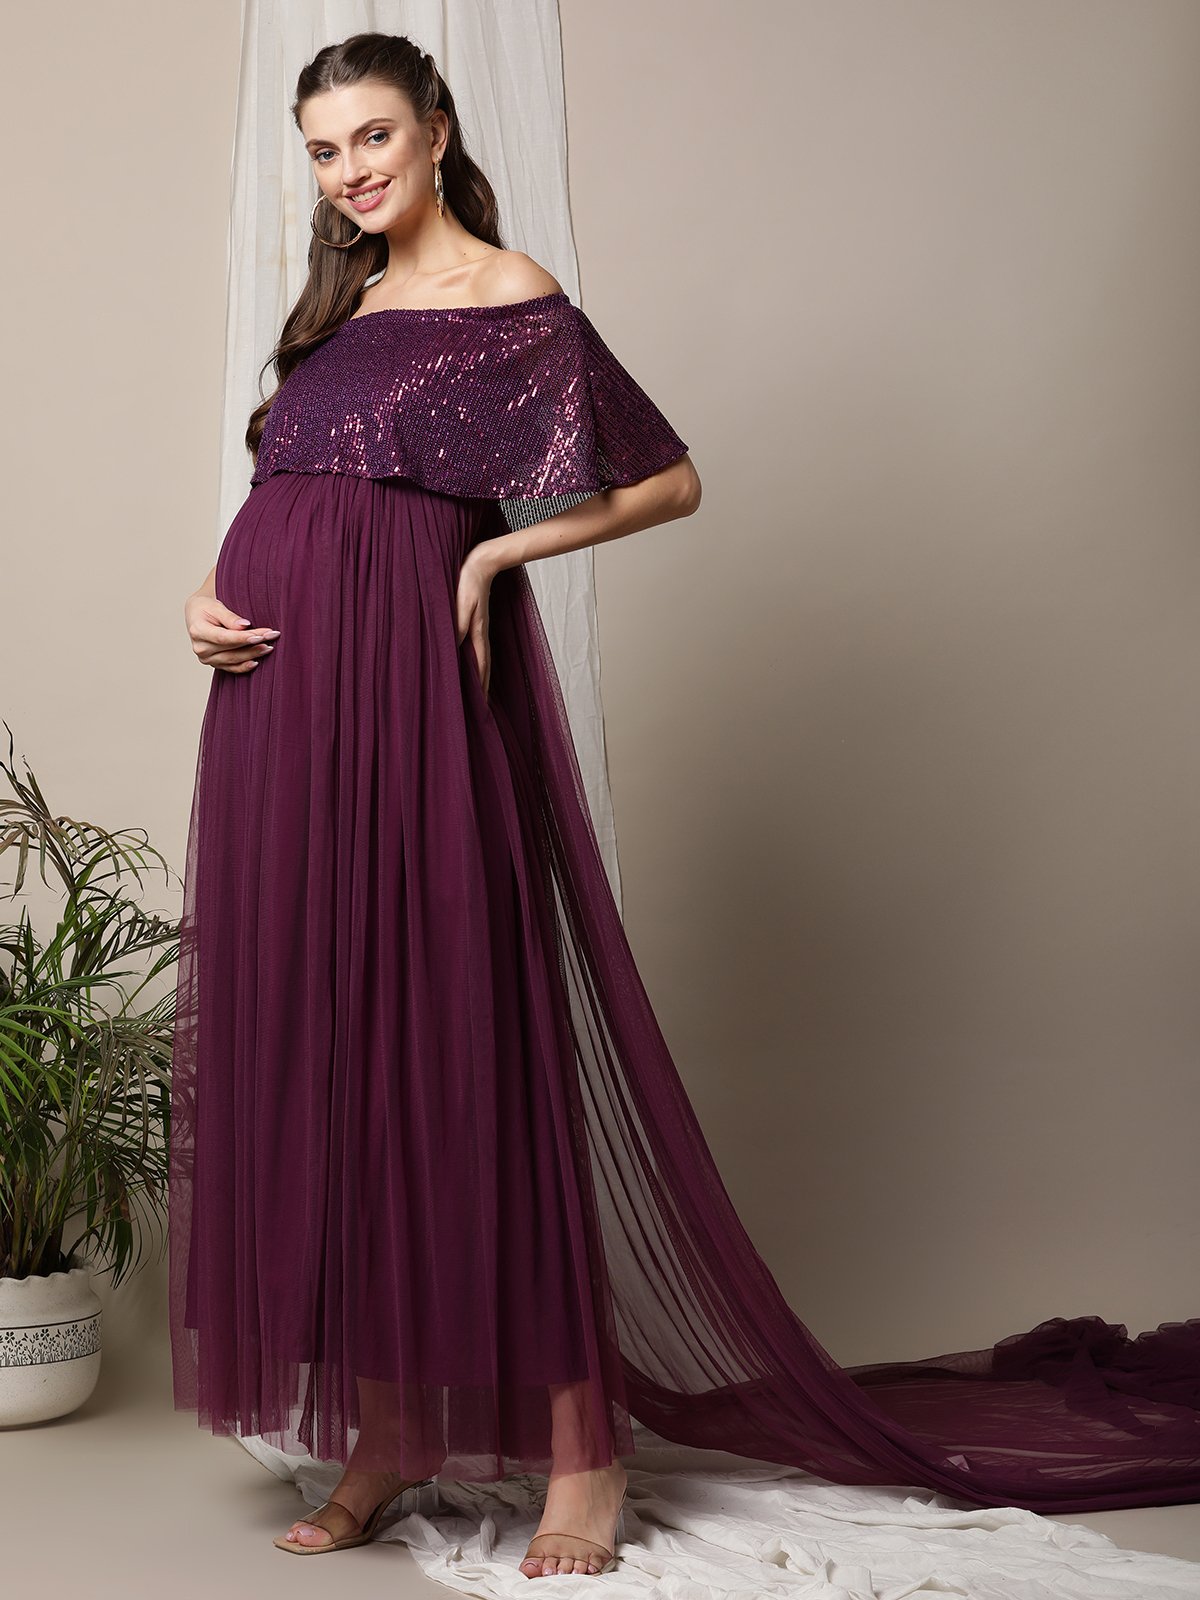 Buy Maternity Photoshoot Dress for Pregnancy Photography Sessions Online in  India - Etsy